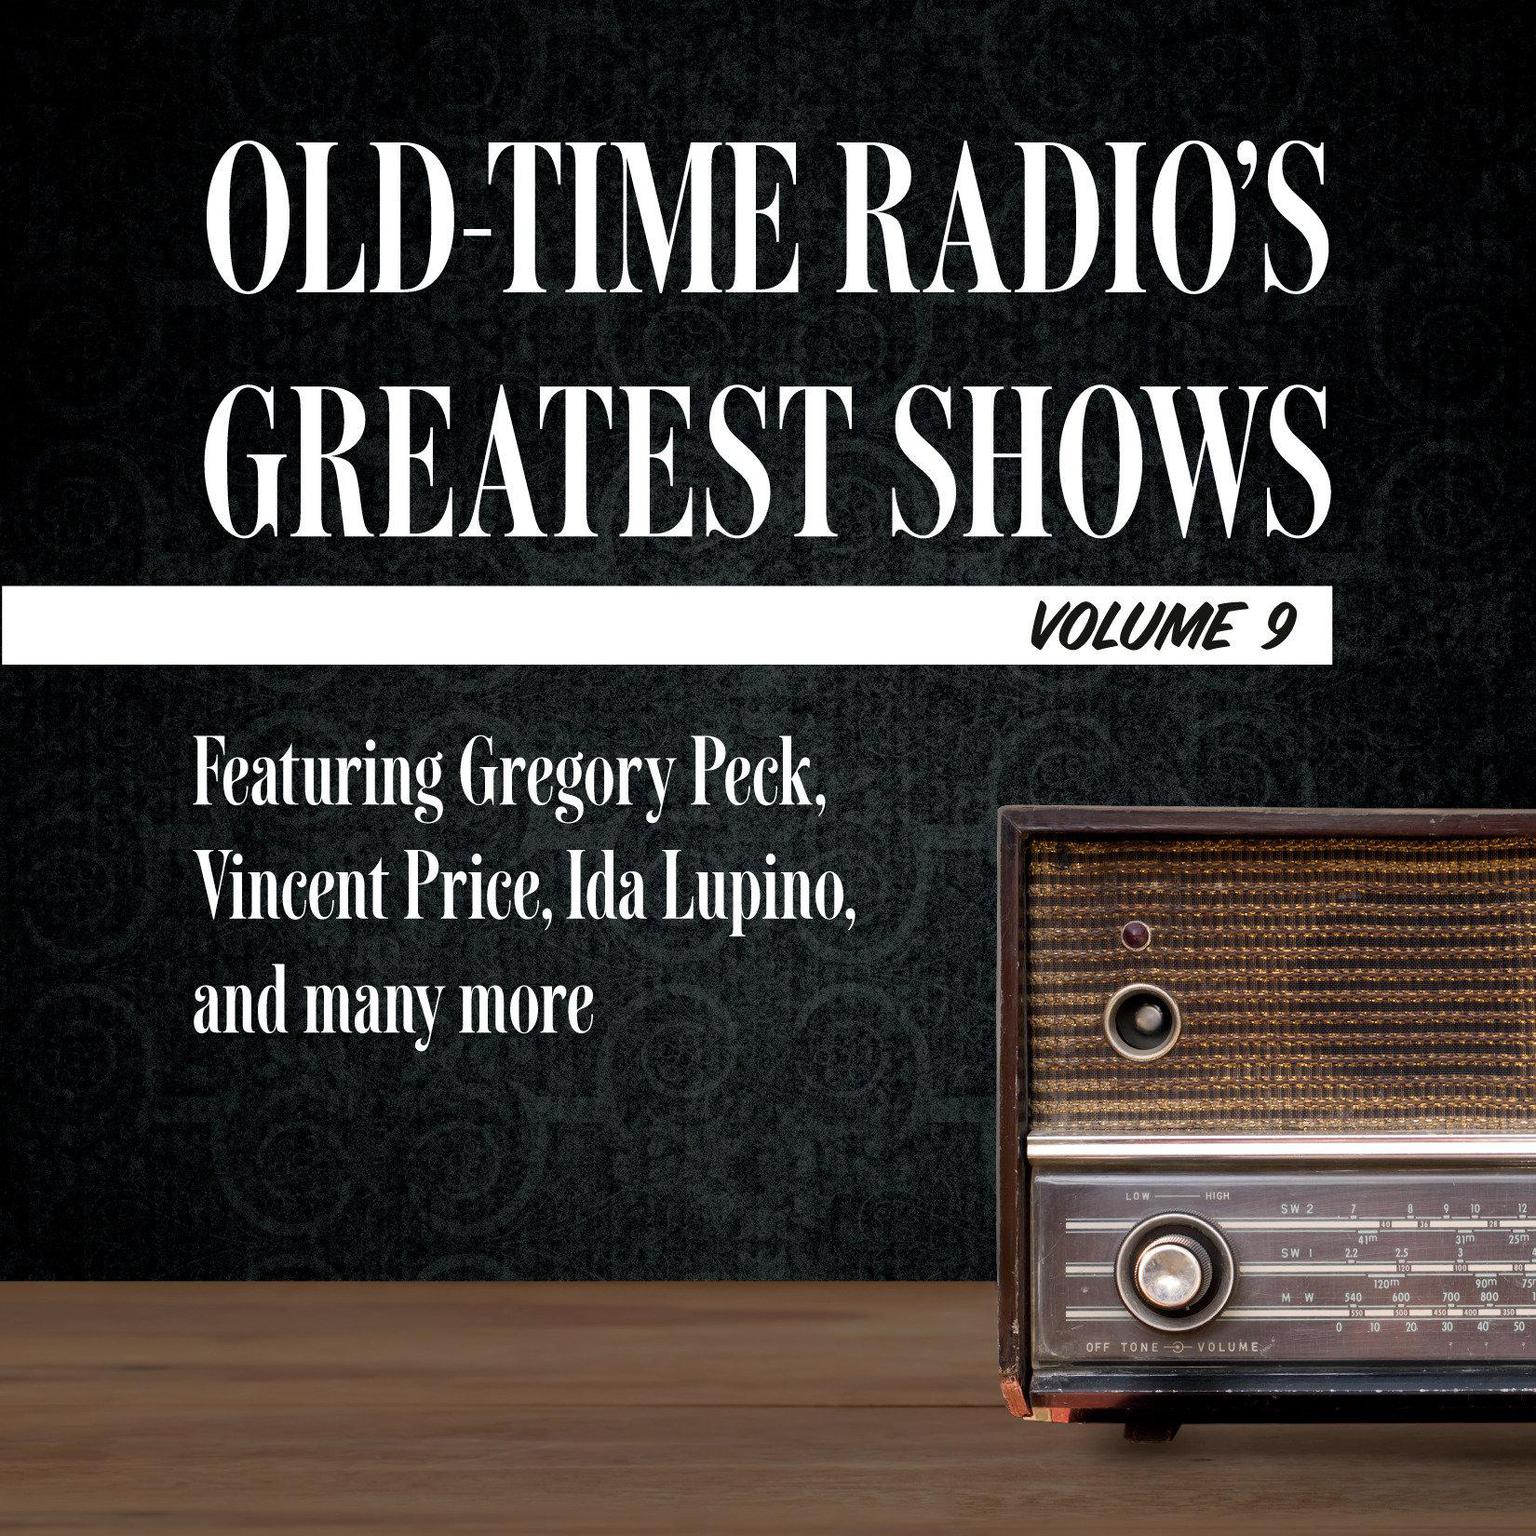 Old-Time Radios Greatest Shows, Volume 9: Featuring Gregory Peck, Vincent Price, Ida Lupino, and many more Audiobook, by Carl Amari